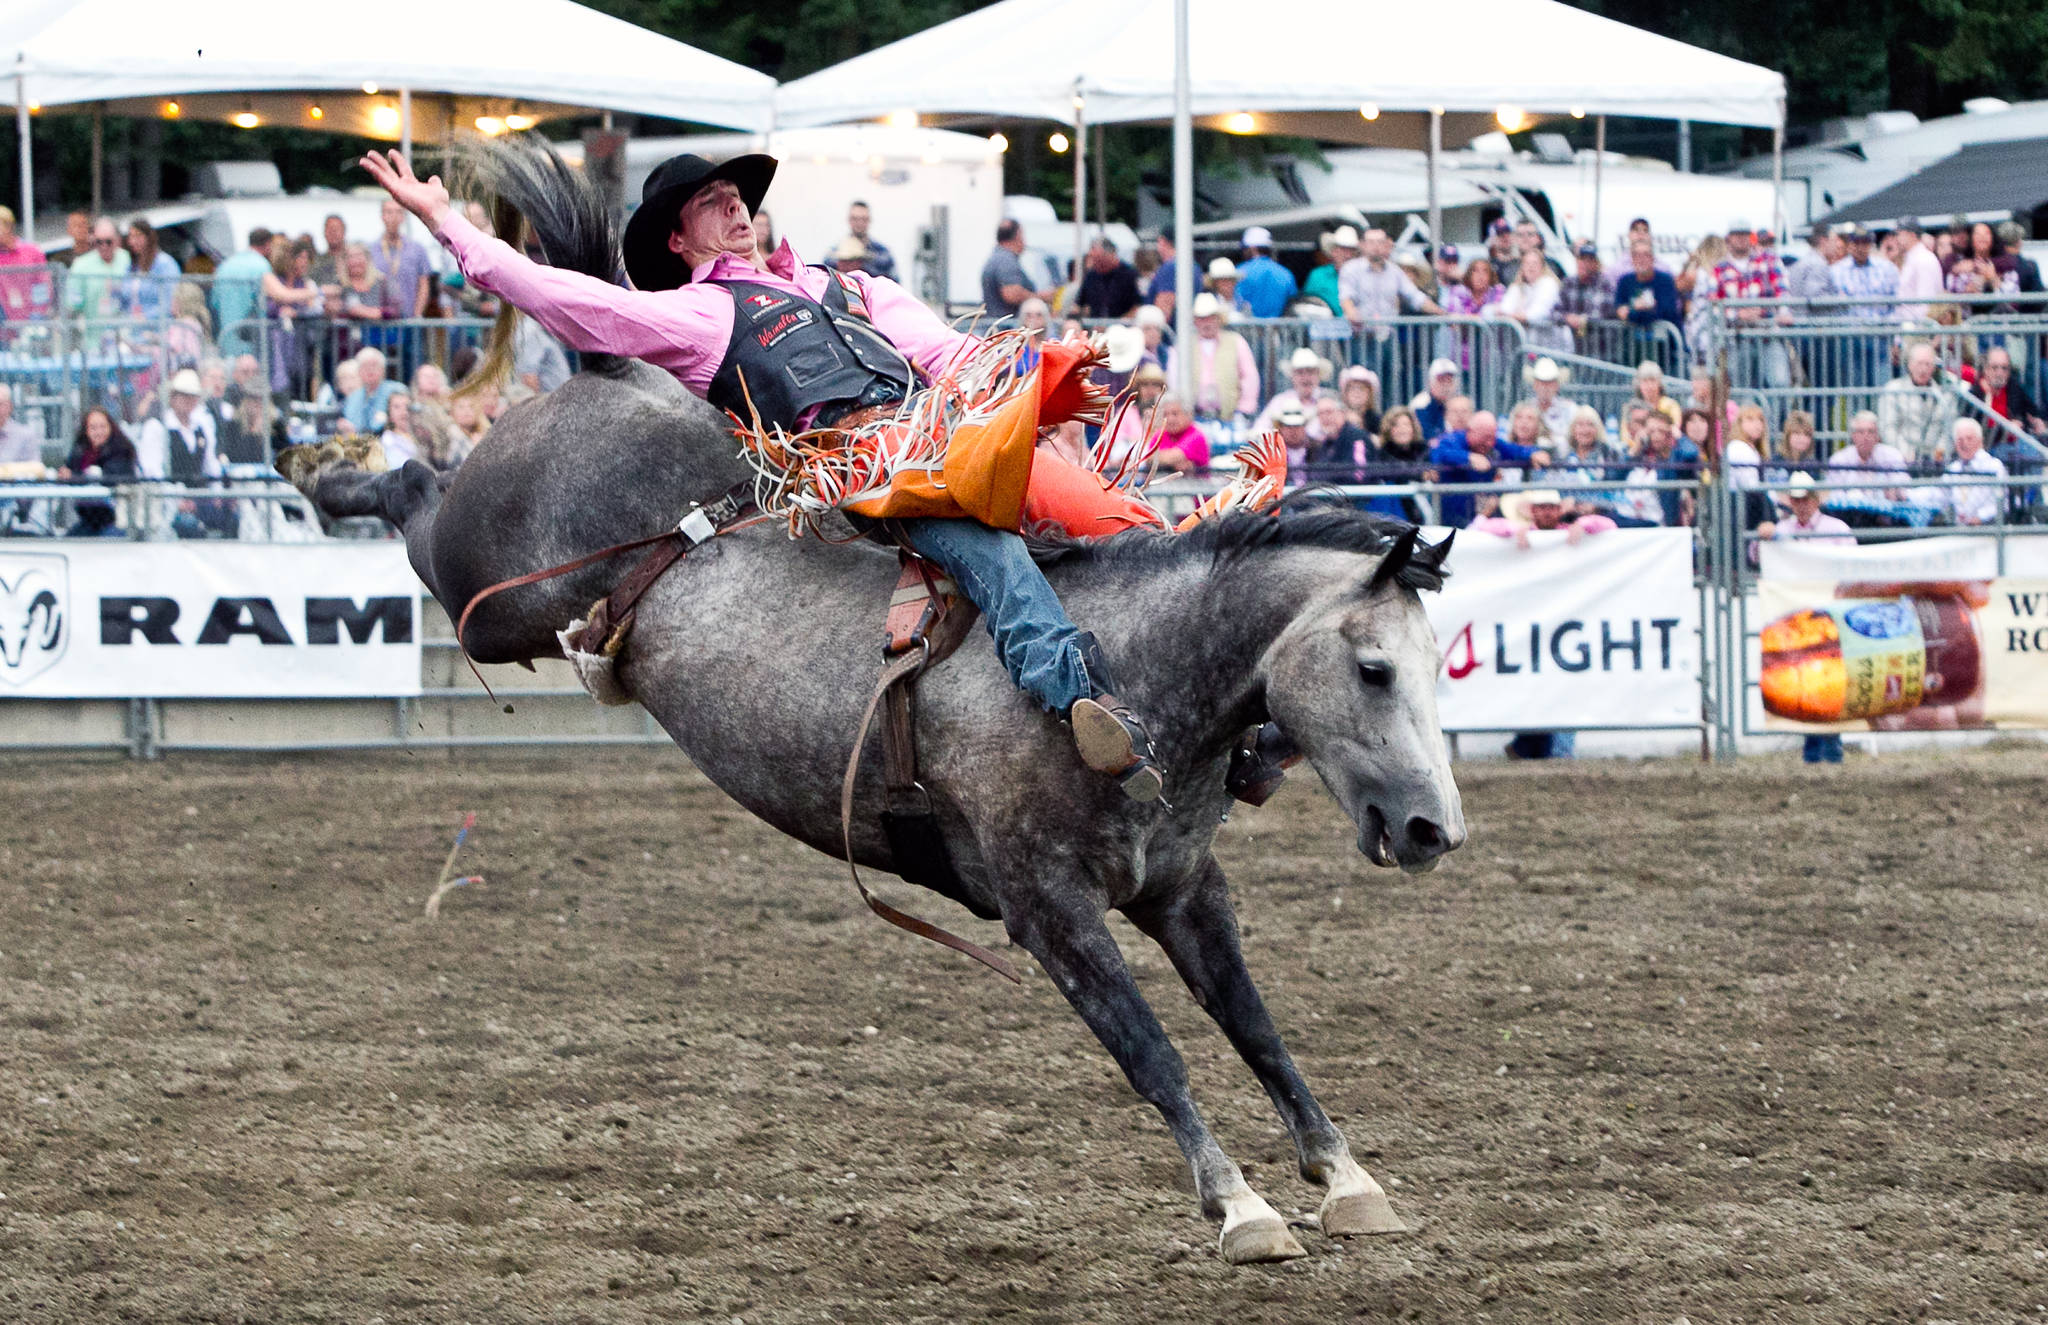 The rodeo will be a highlight of this year’s Kitsap Fair and Stampede. PRCA ProRodeo photo by Kent Soule.